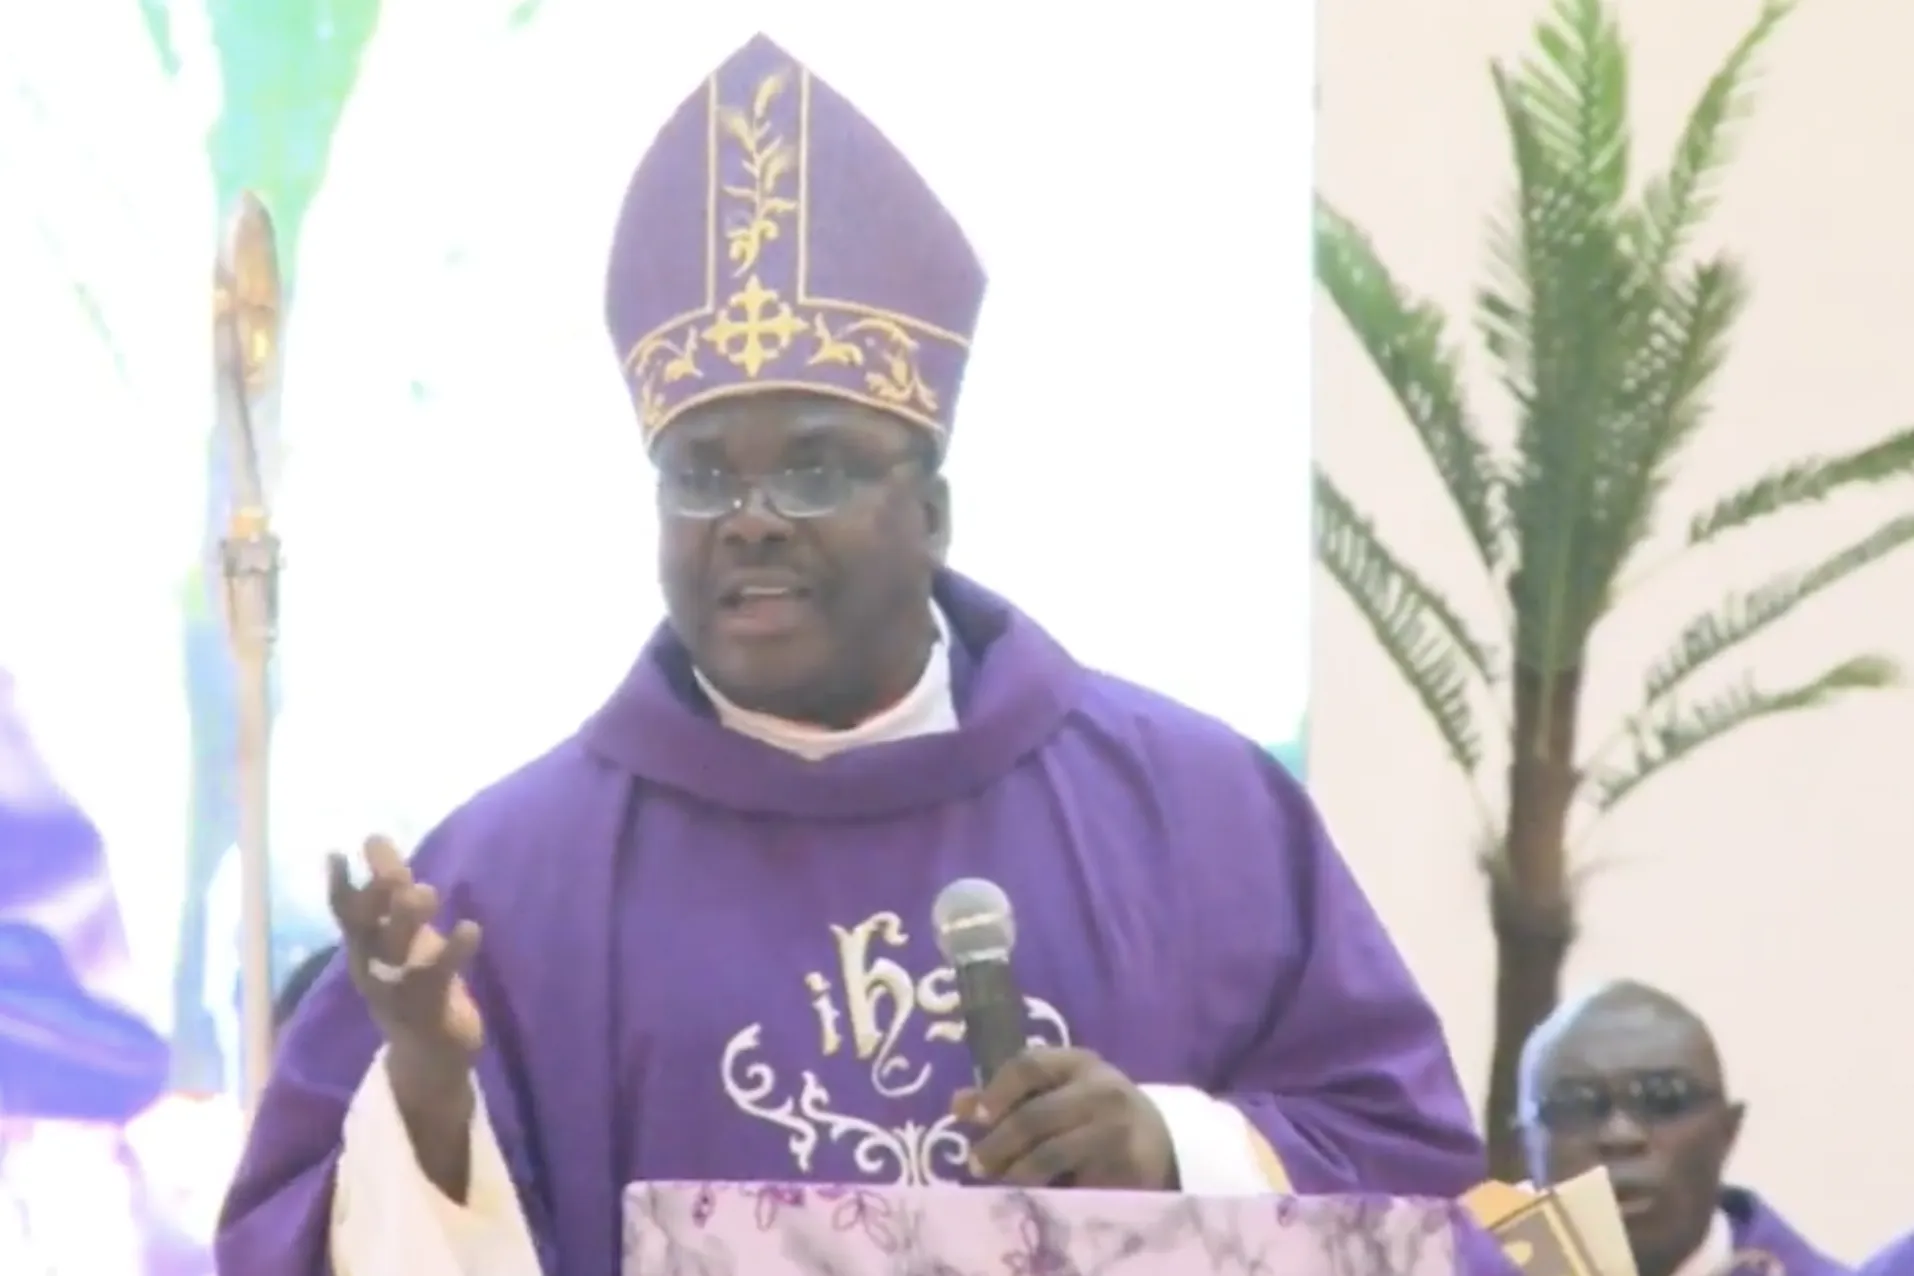 Bishop Emmanuel Badejo of Oyo preaches the homily at the funeral of the Owo Pentecost massacre victims, June 17, 2022.?w=200&h=150